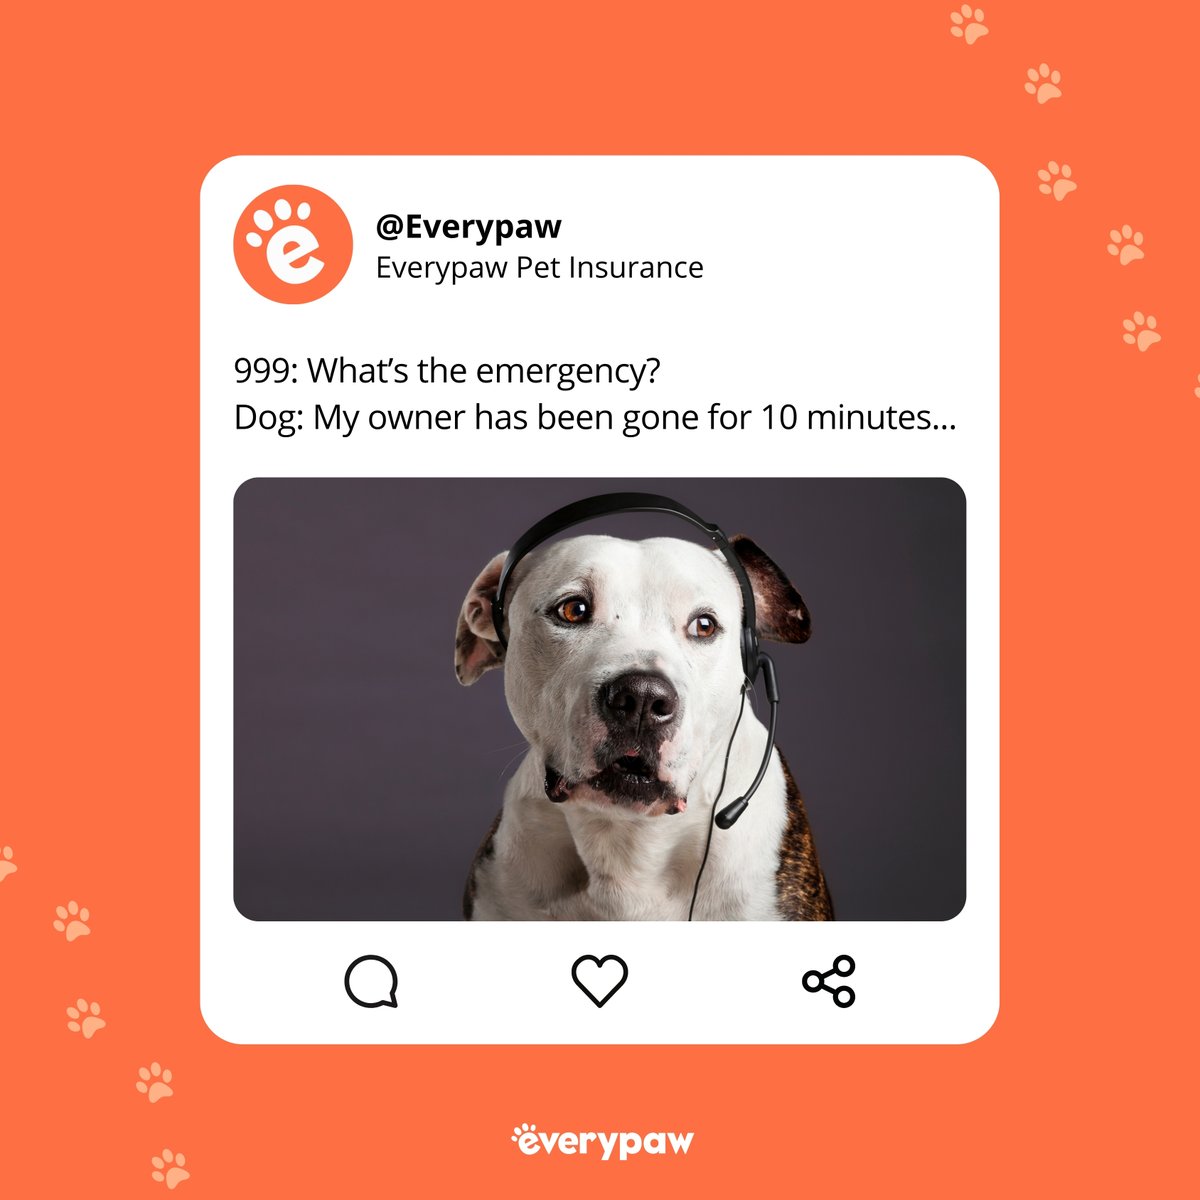 Dialing 999 for a canine crisis: 'Emergency? My human's been gone for 10 minutes!' 🐾🚨 

Time to sound the paw-patrol alarm! 🐶😄 

#Furry911 #DoggyDistress #dogowner #doggomeme #dogmeme #dogs #dogsdaily #lovedogs #funnydogs #everypaw #petinsurance #everypawuk